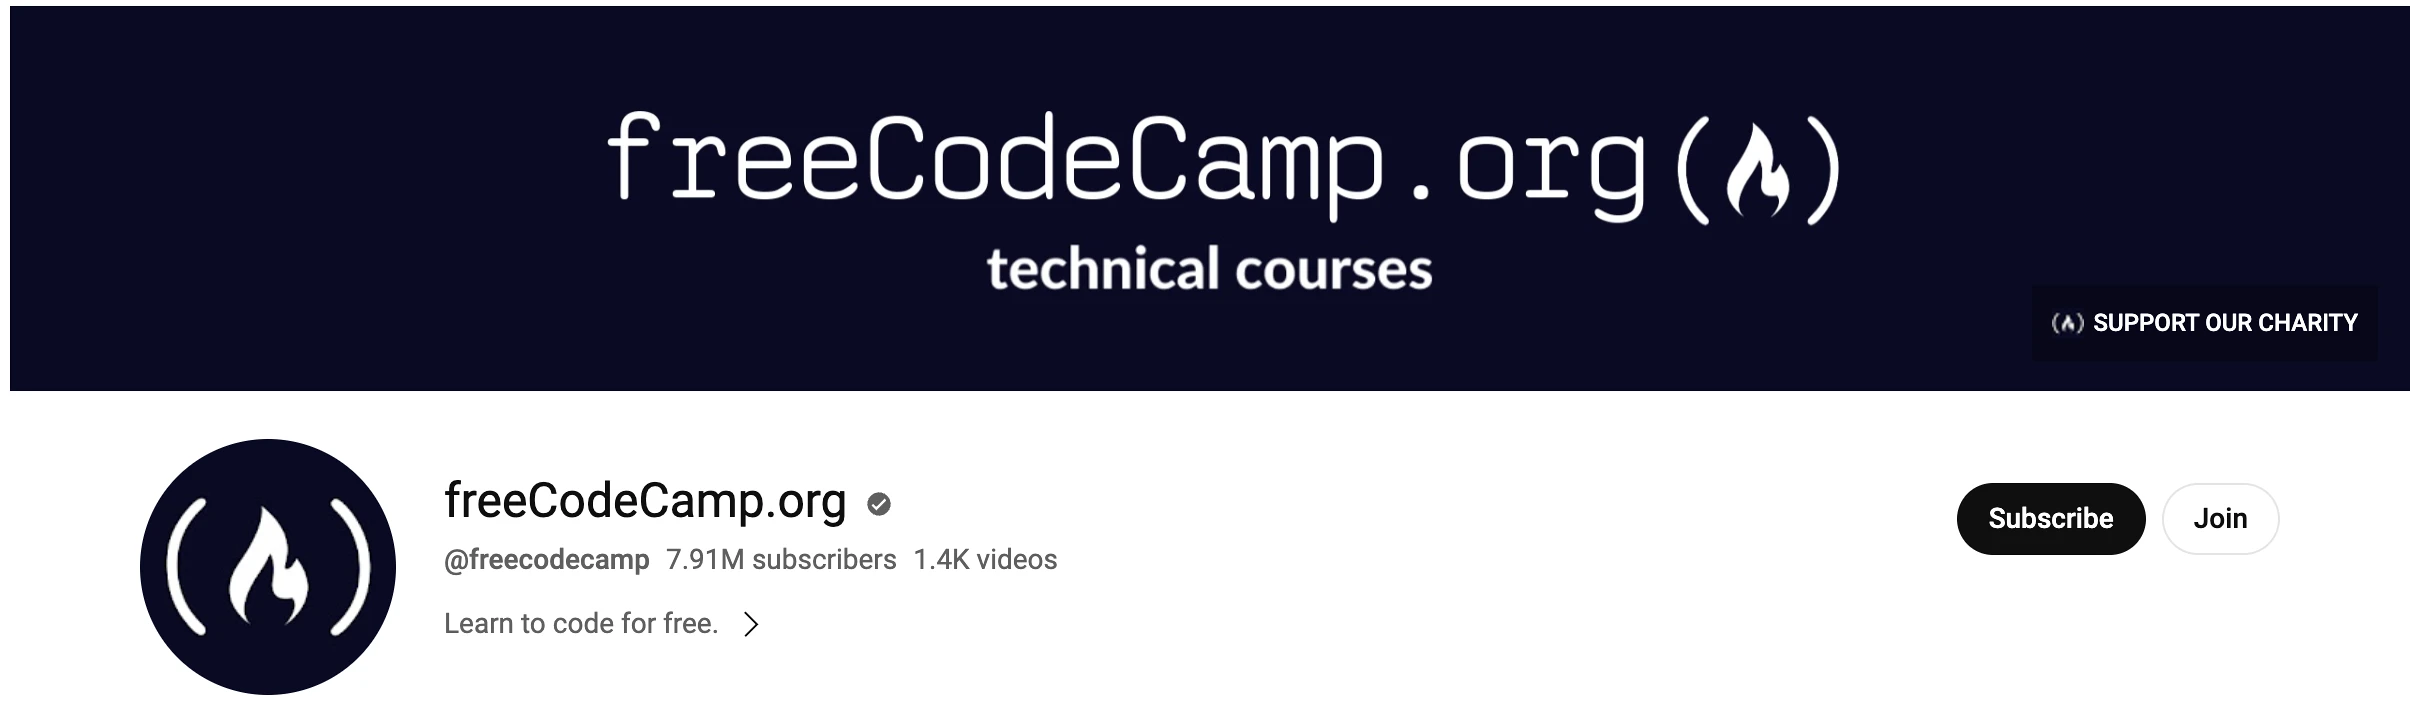 FreecodeCamp- List of Best Web Design and Web Development Youtube Channels